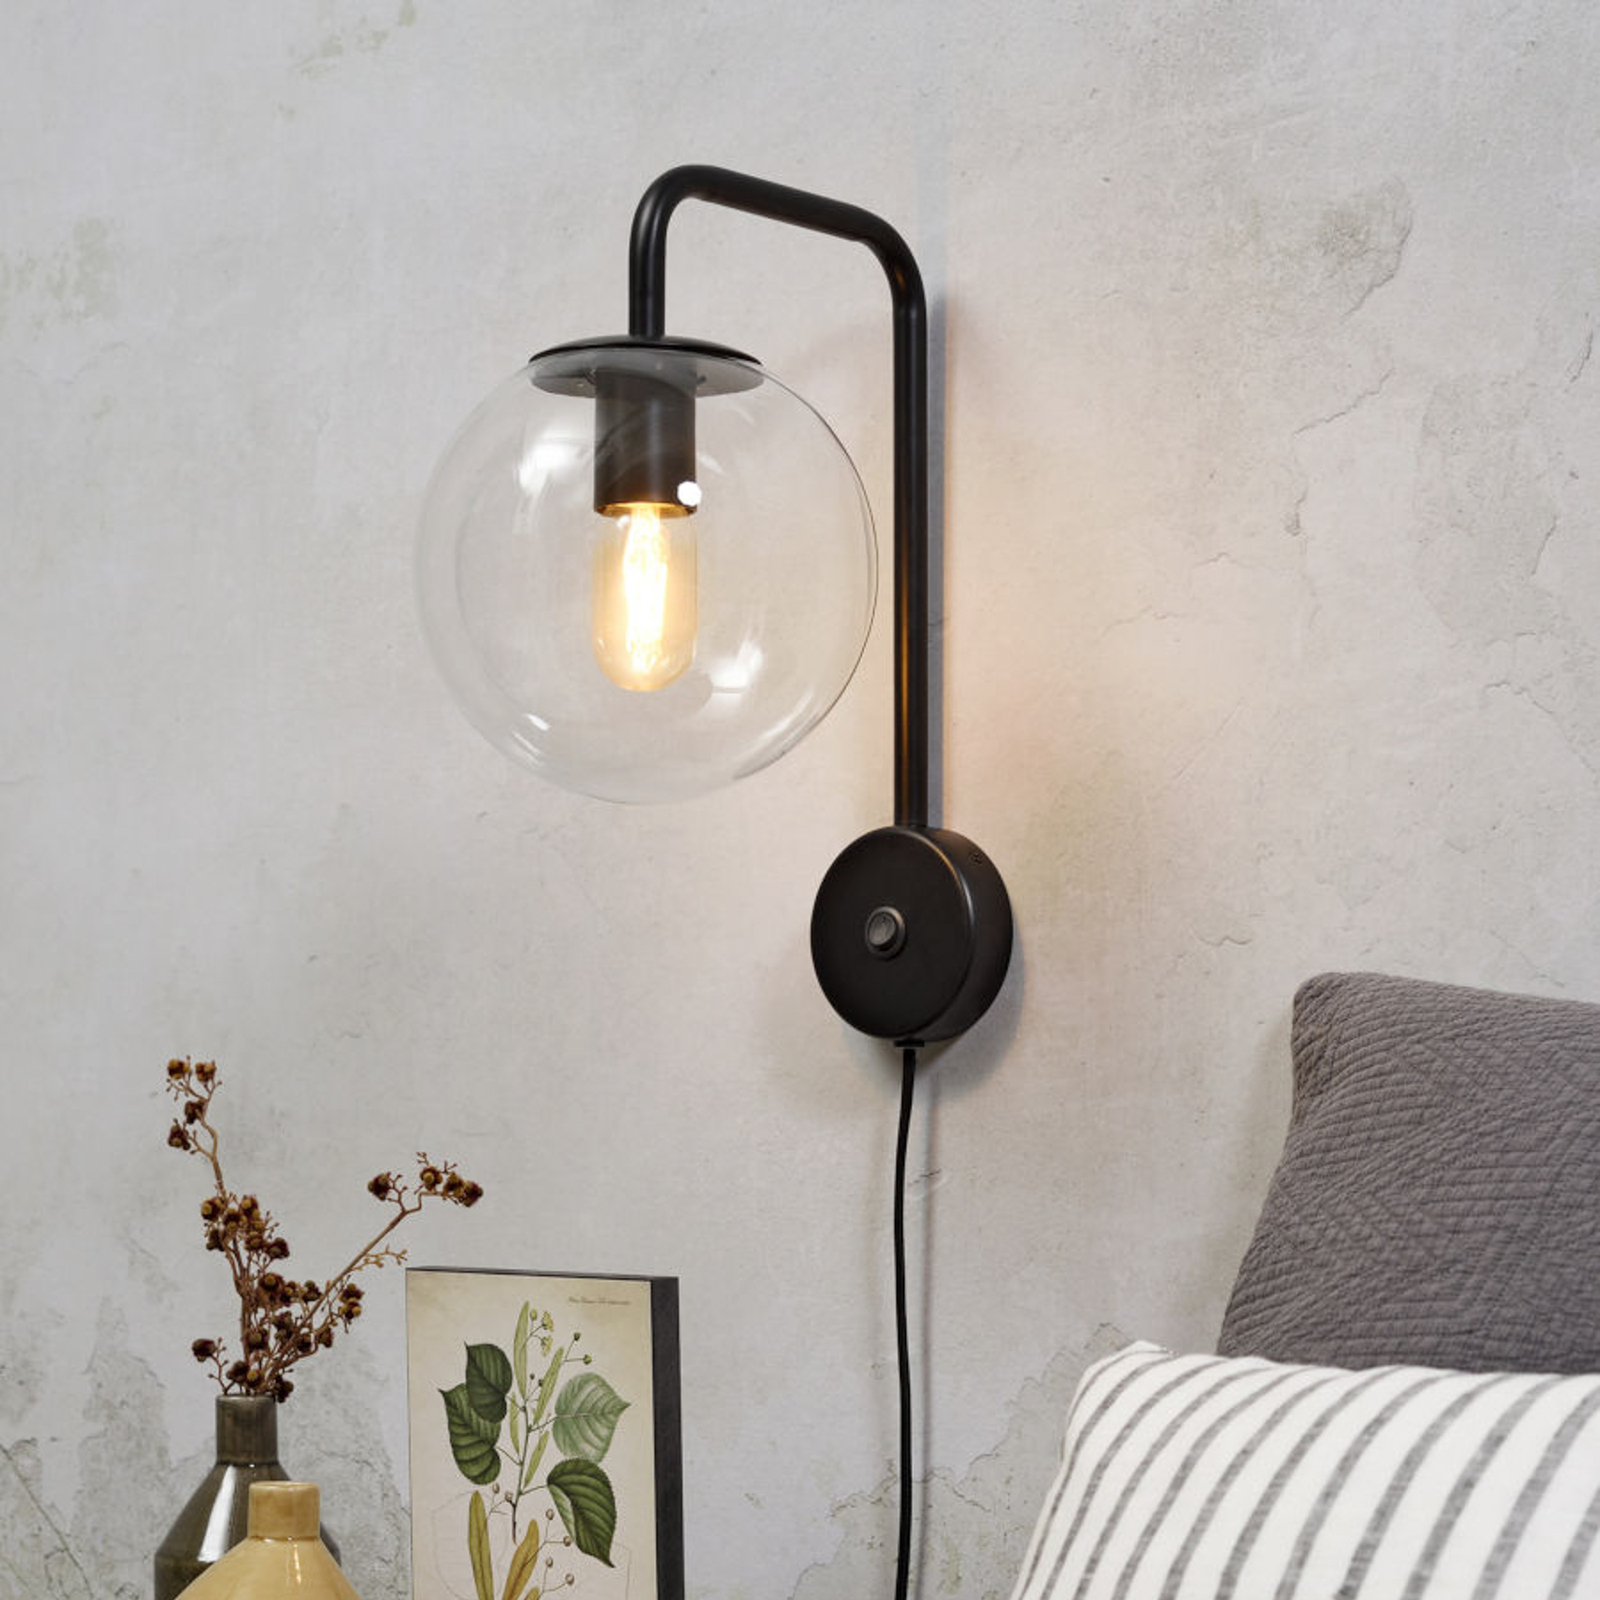 It’s about RoMi Warsaw wall light, black/clear